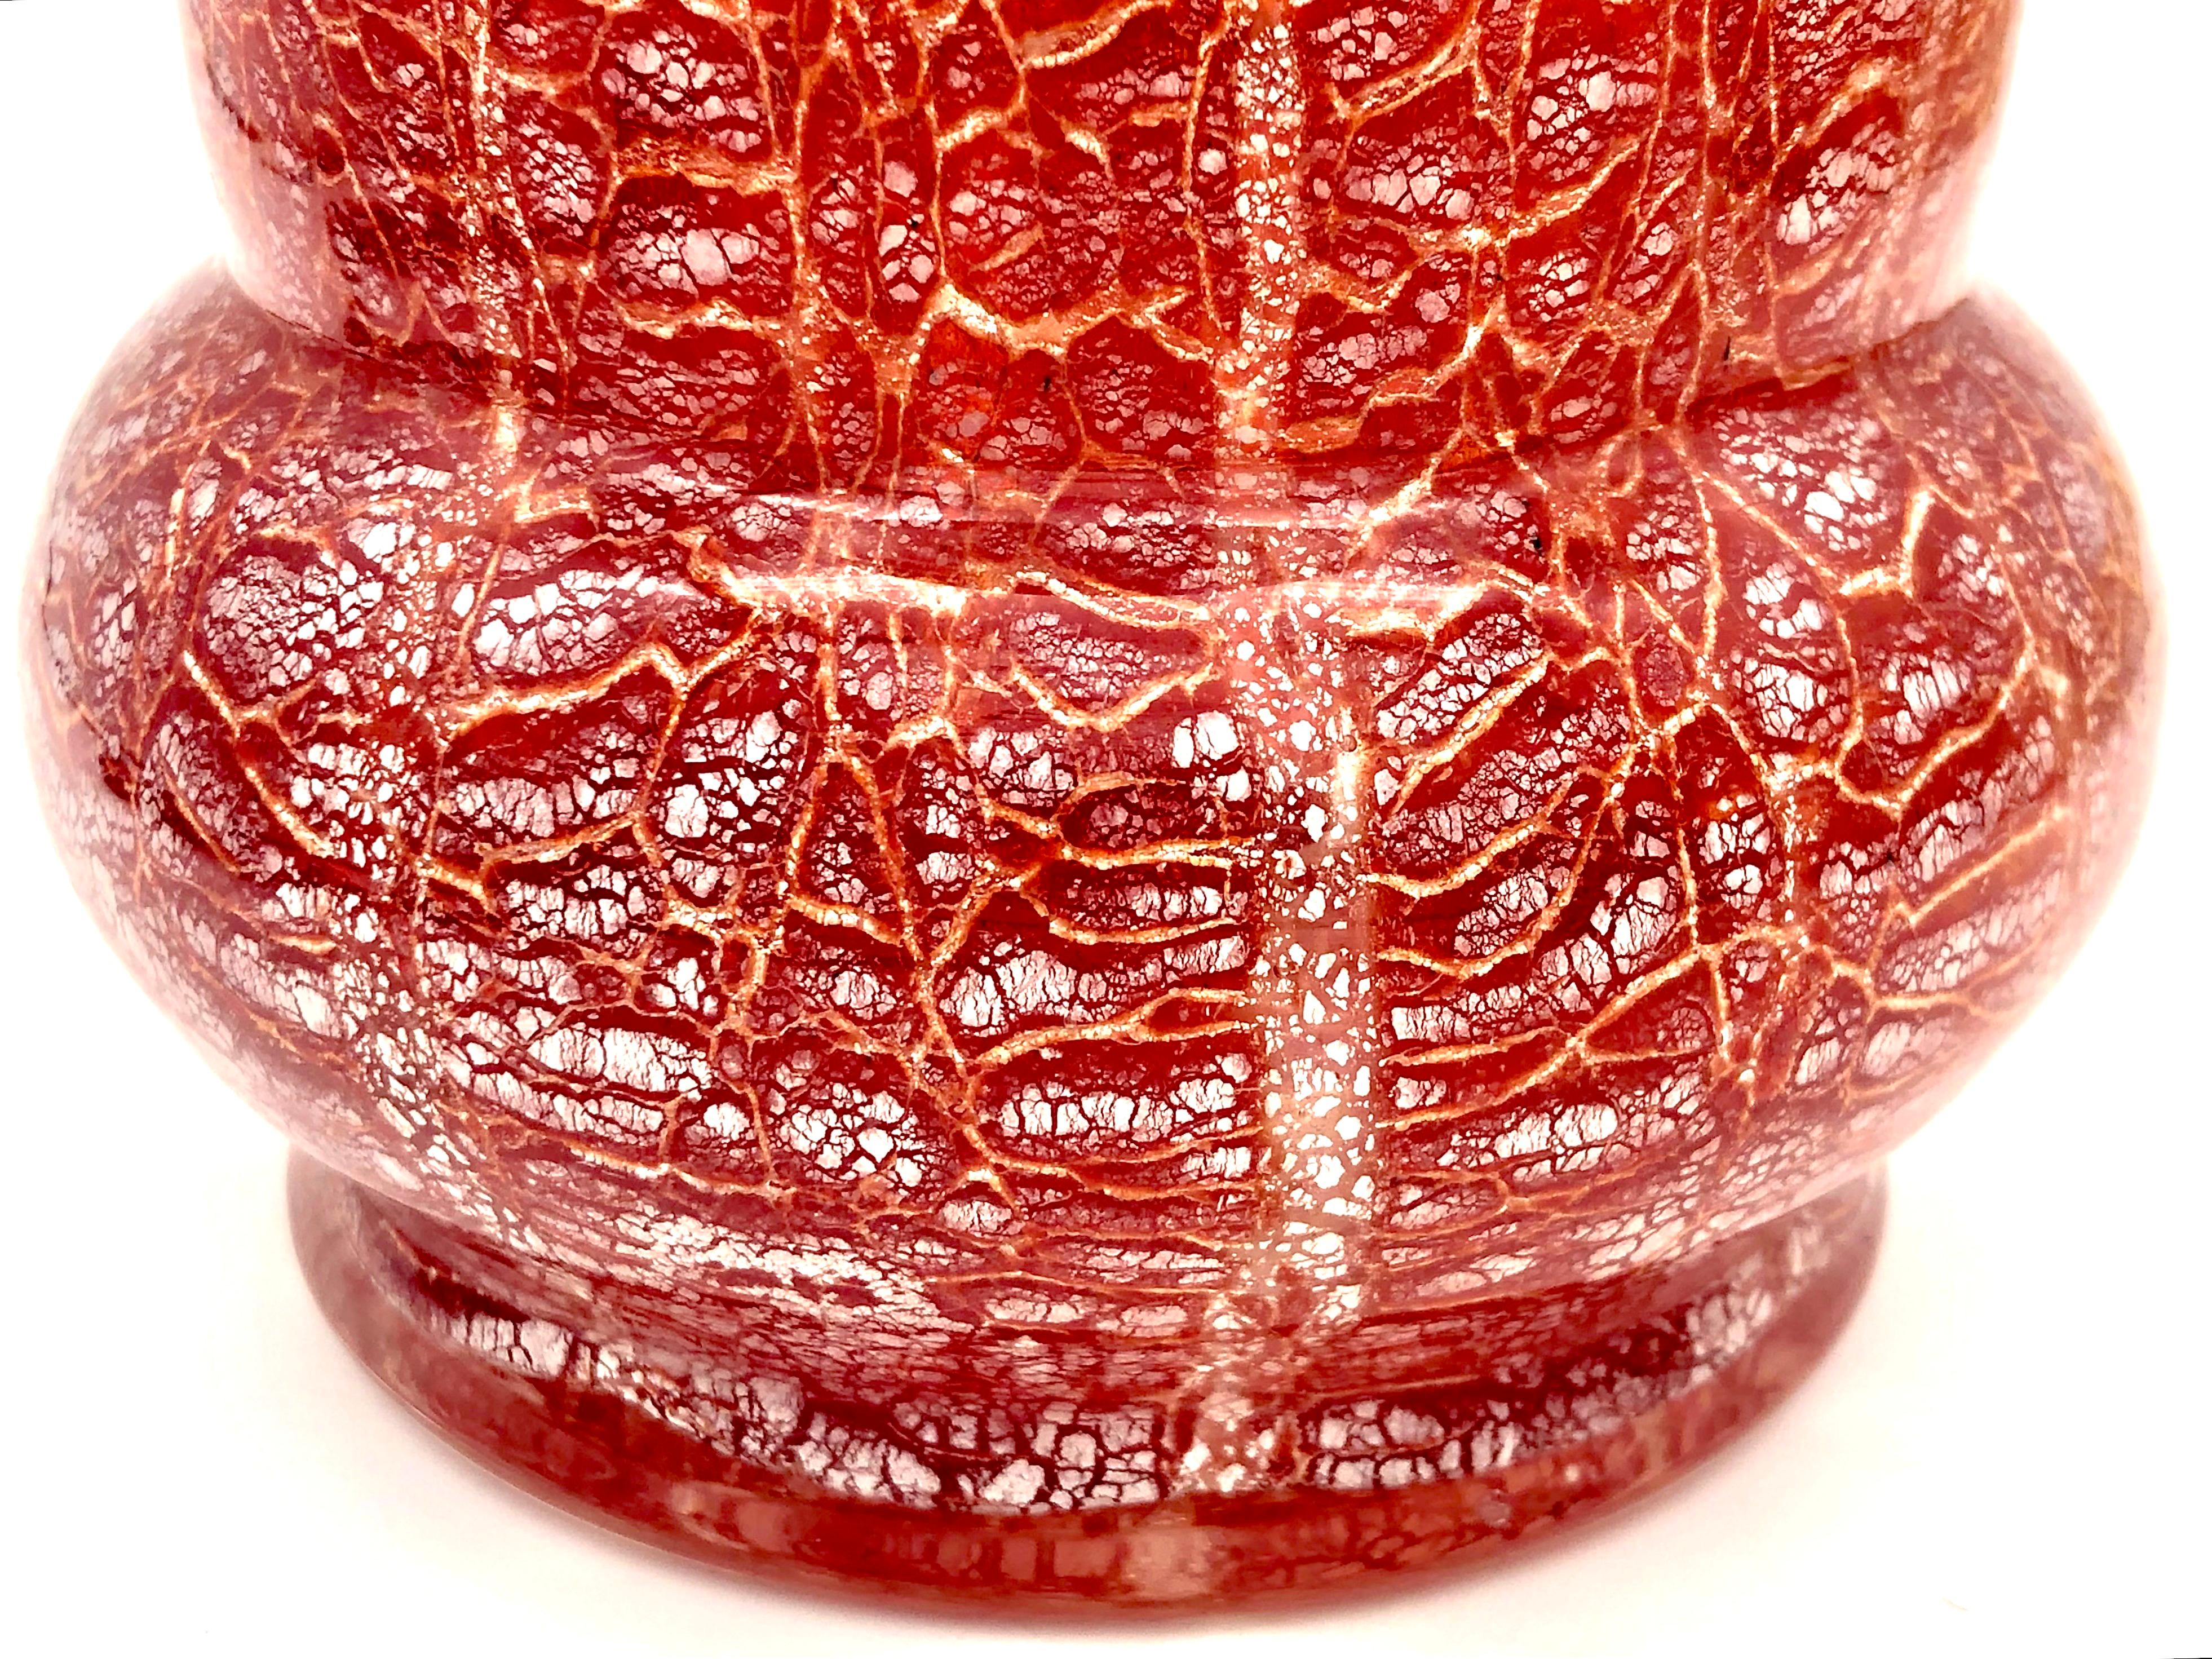 Hand-Crafted Art Deco Glass Vase Karl Wiedmann For WMF Red Glass With Silver Foil Inclusions For Sale